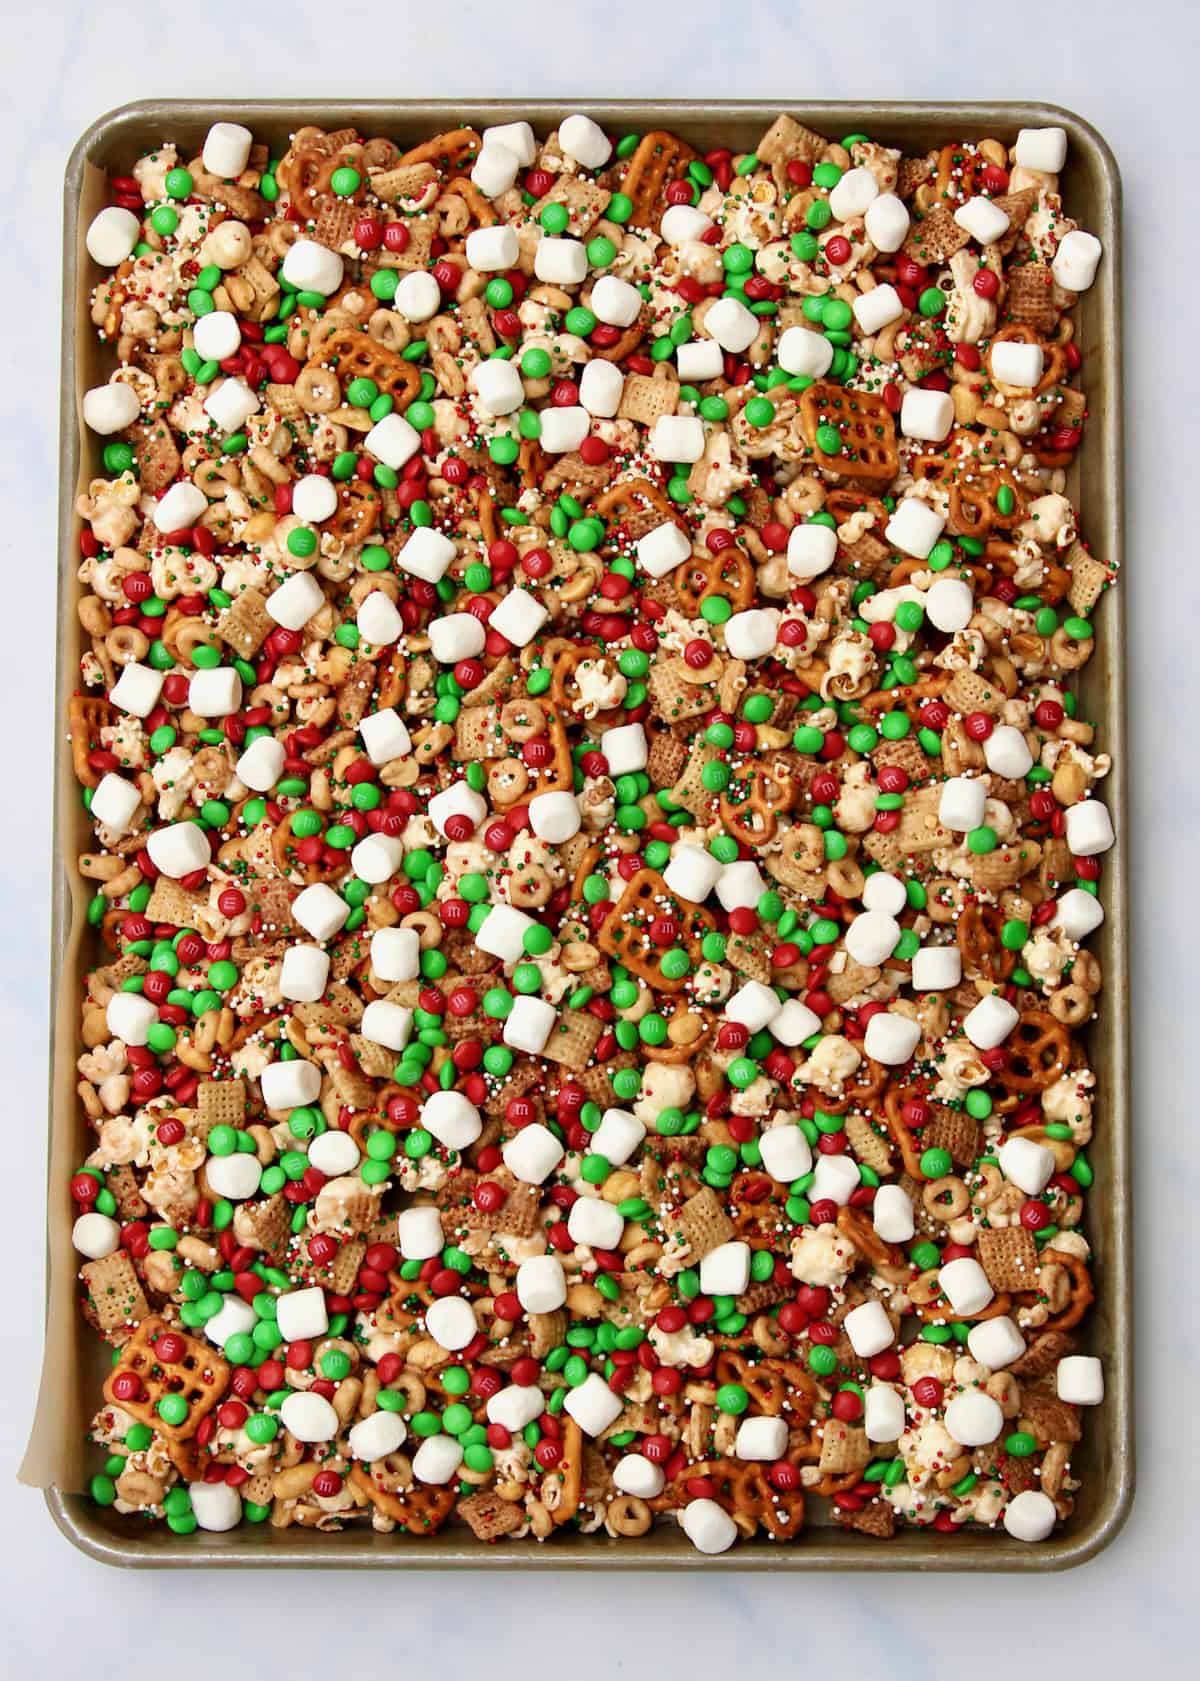 A baking tray filled with cooling snack mix.